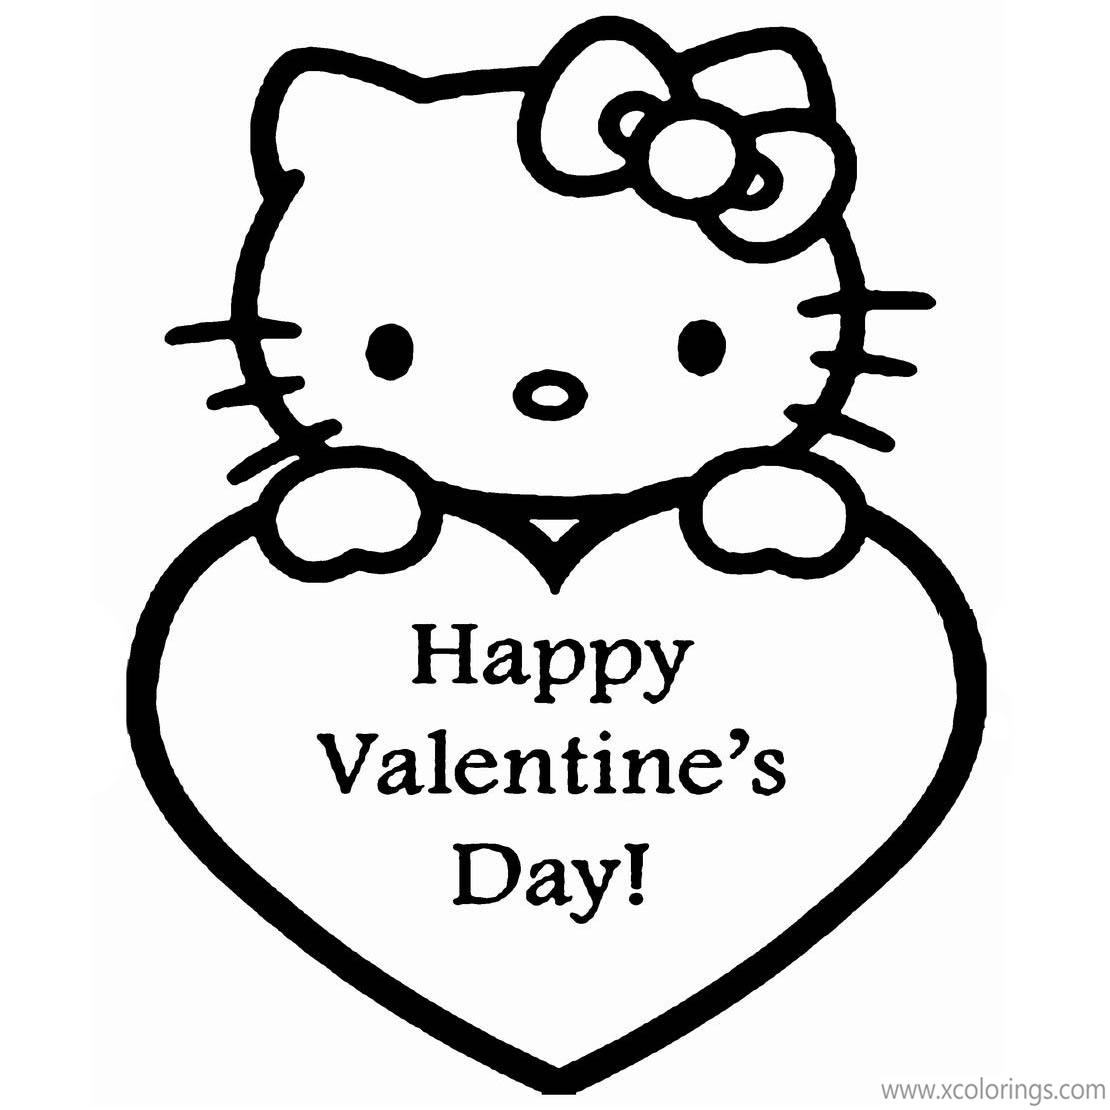 Free Hello Kitty Valentines Day Coloring Pages Happy Valentine's Day printable